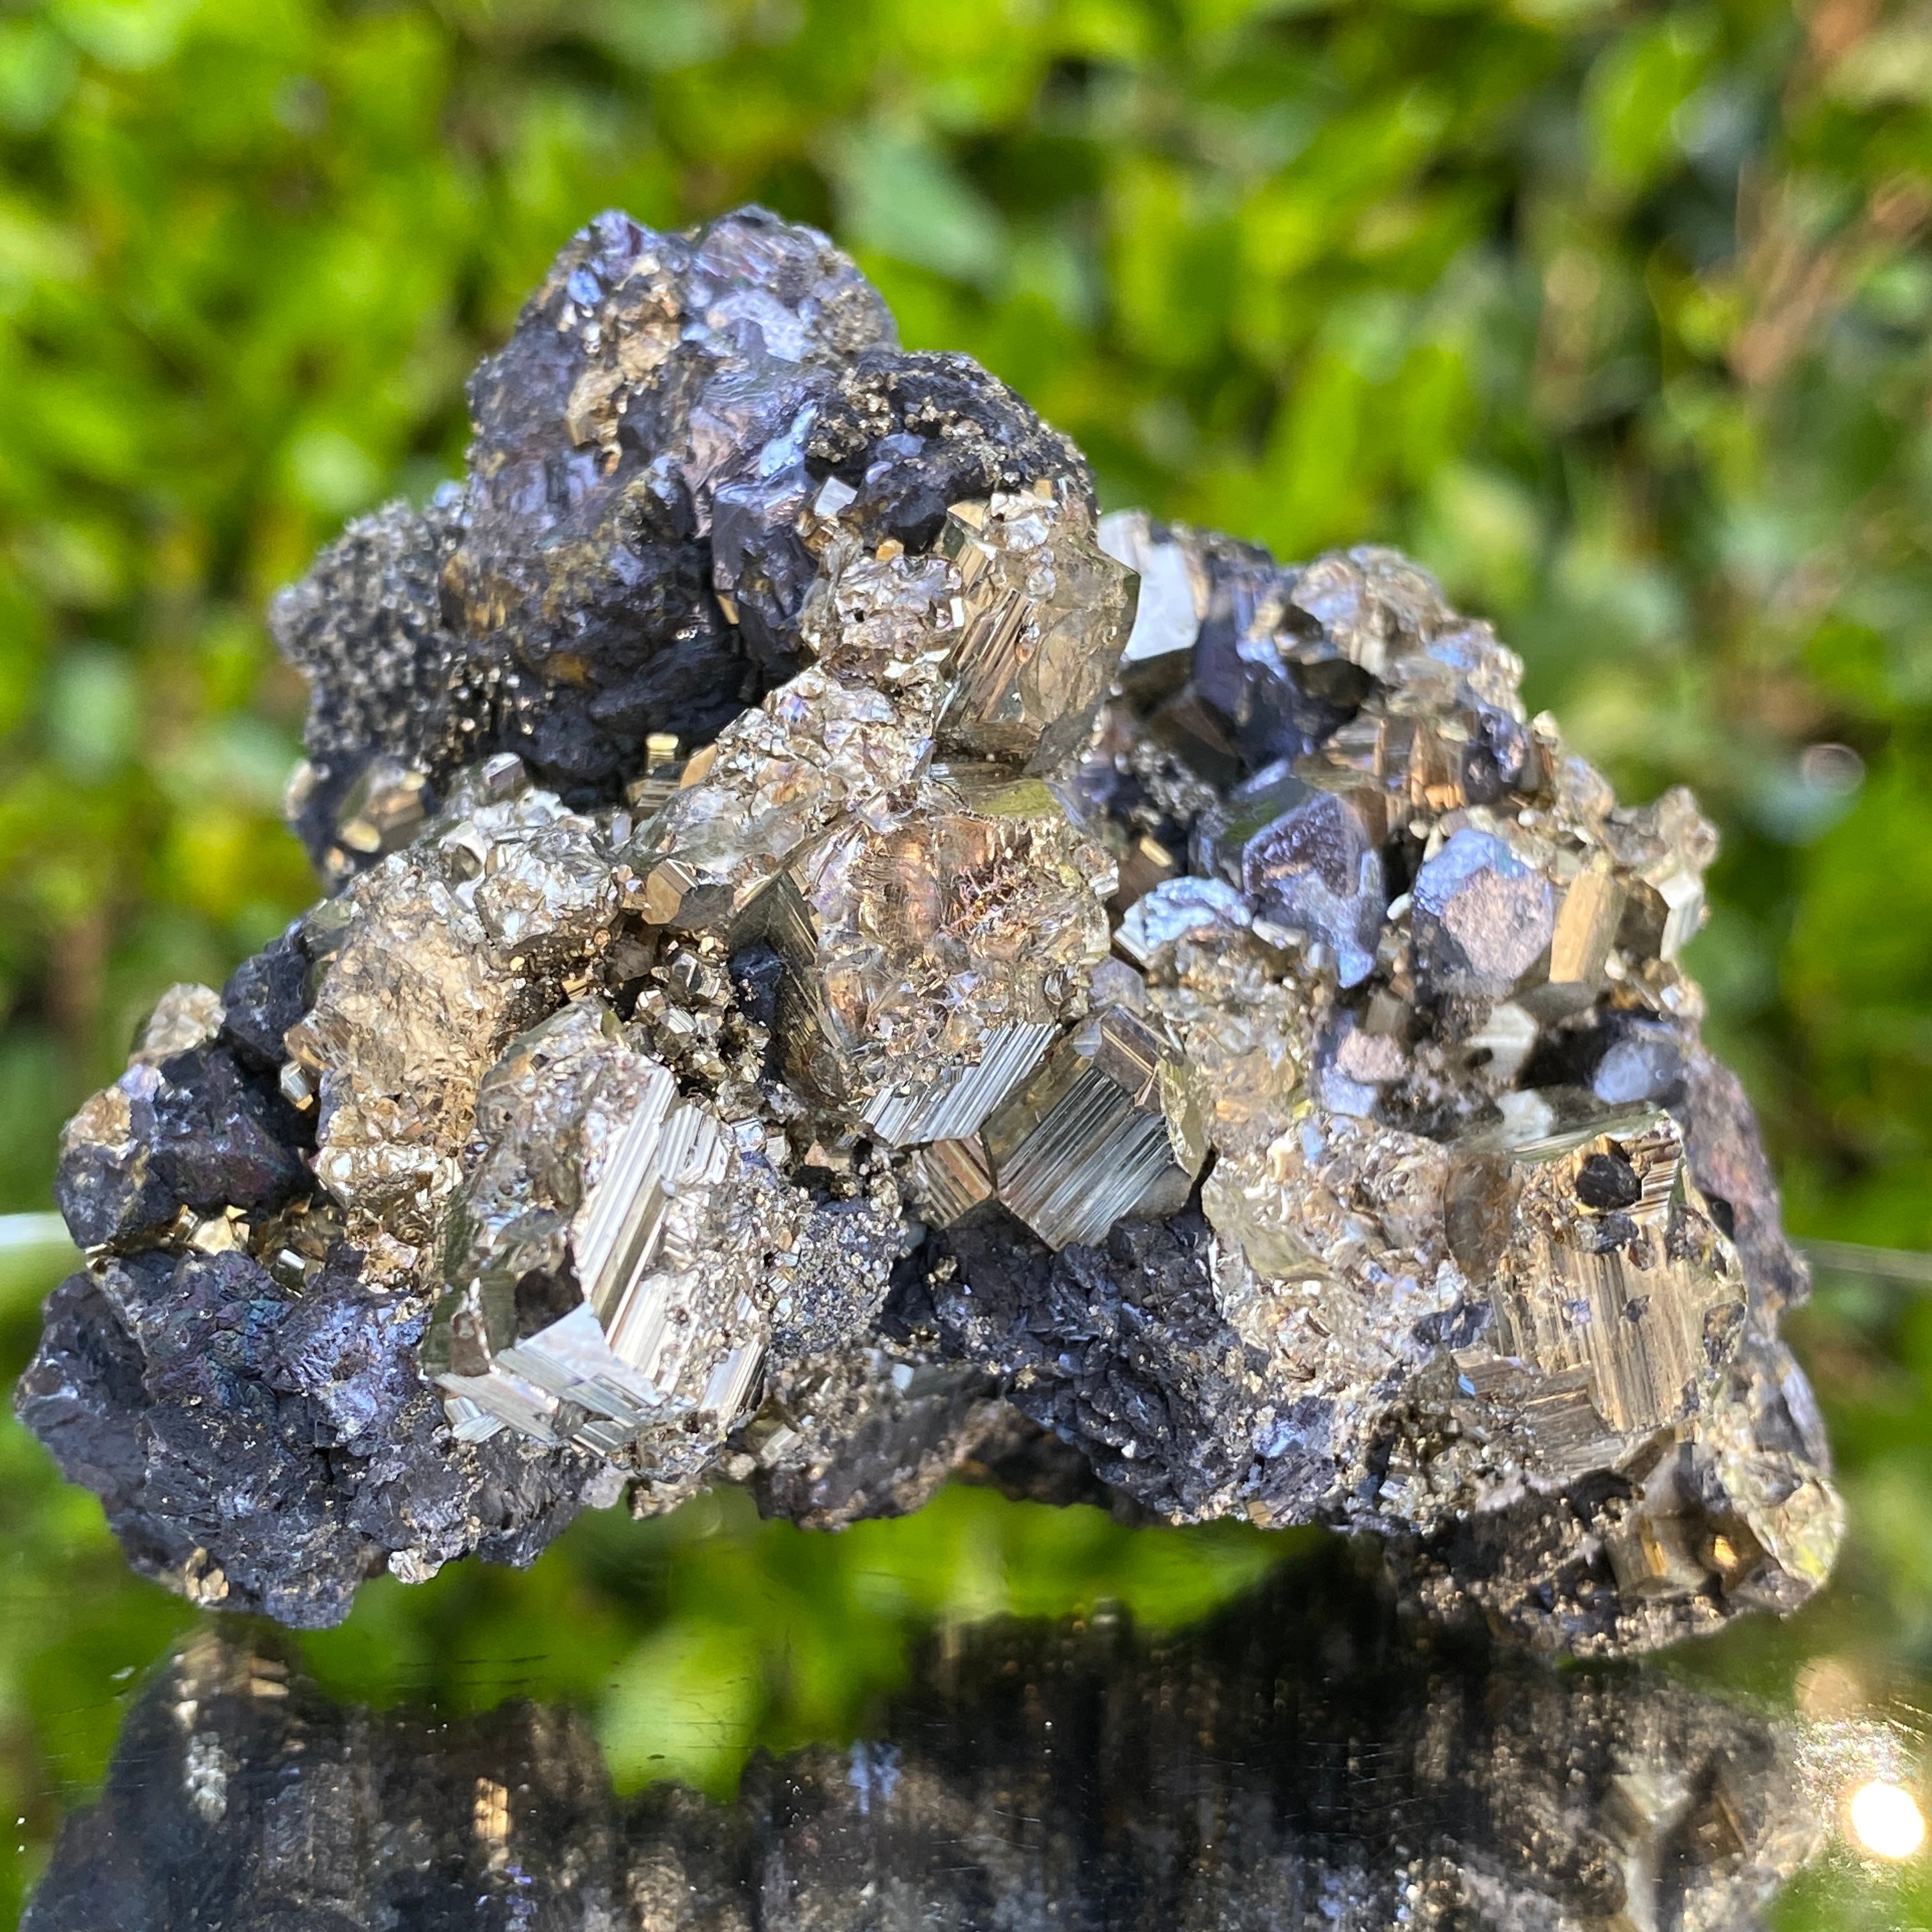 306g 7x6.5x5cm Silver Galena and Gold Pyrite from Peru